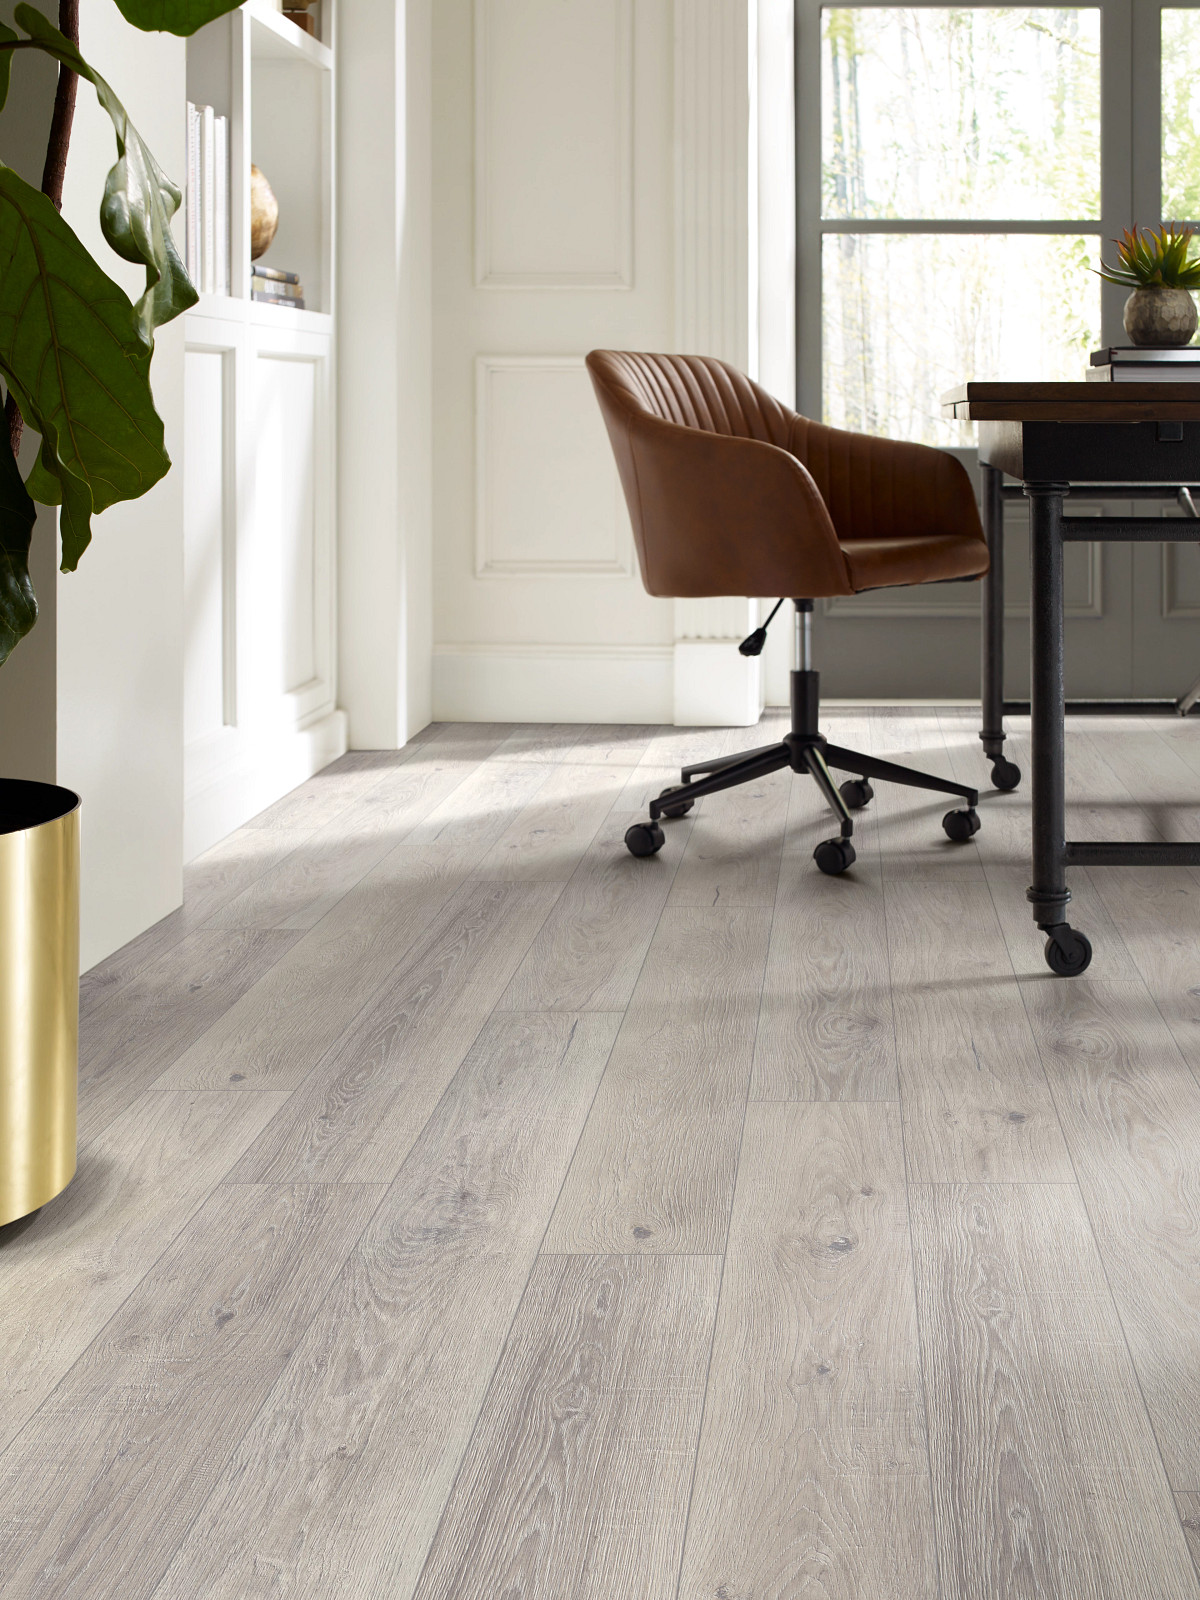 Office with affordable but beautiful laminate flooring